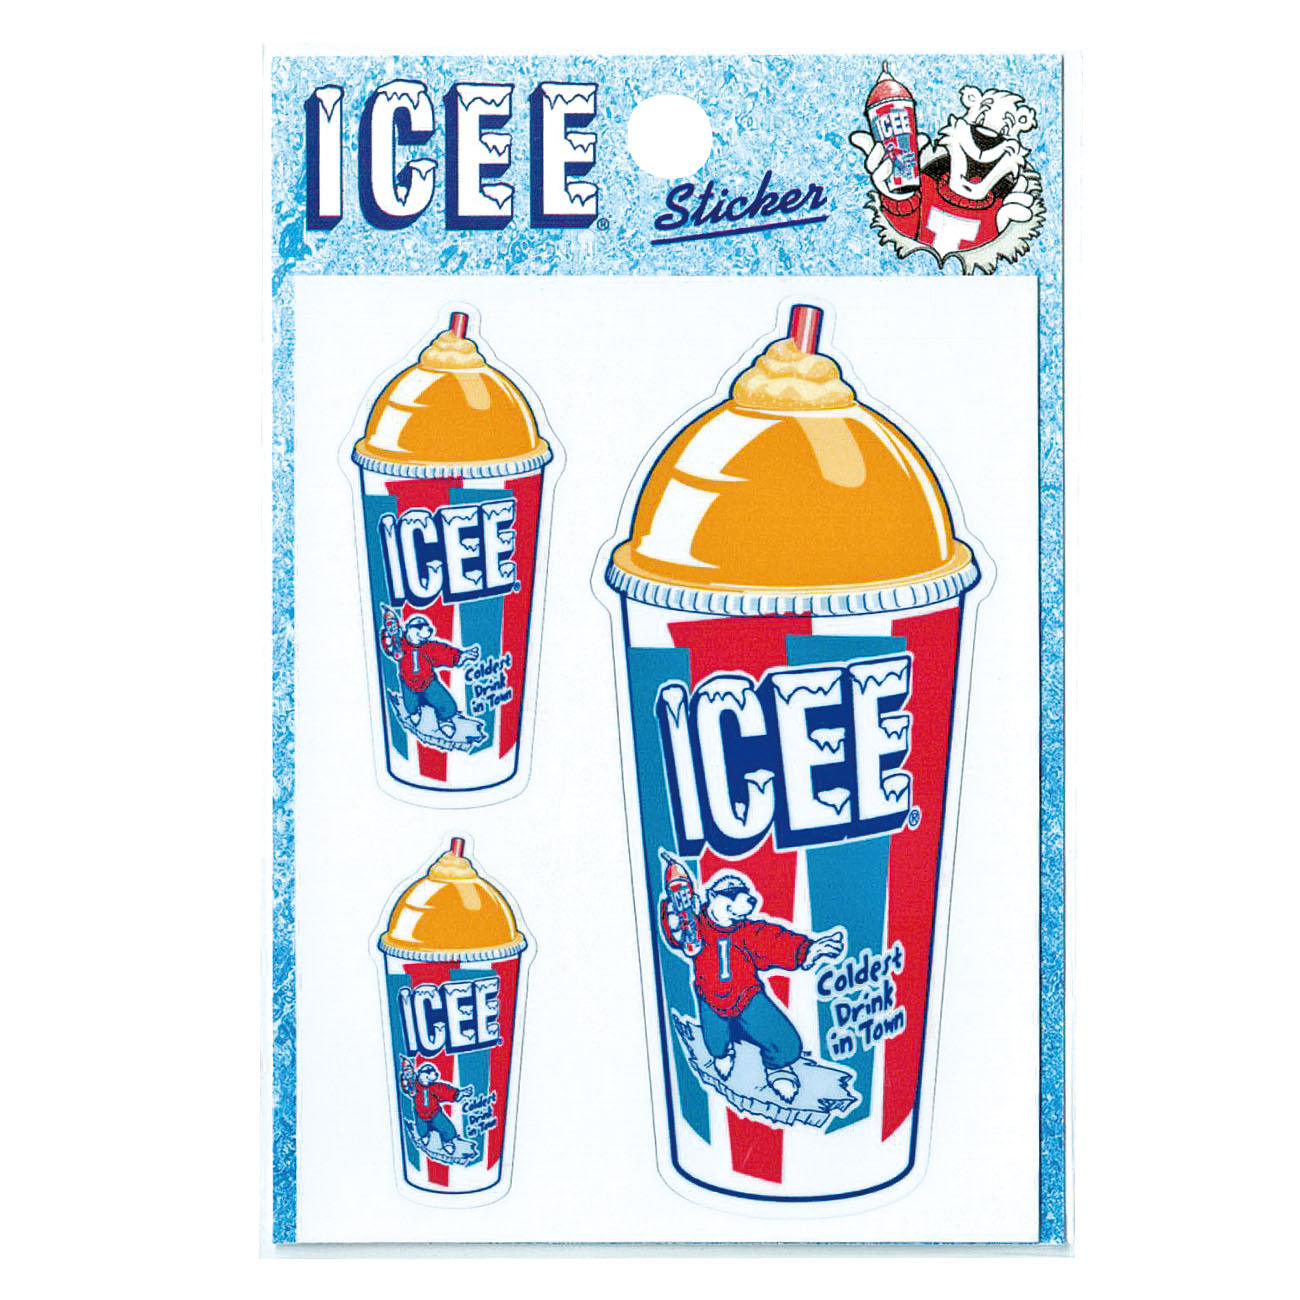 STICKER【ICEE NEW CUP OR】